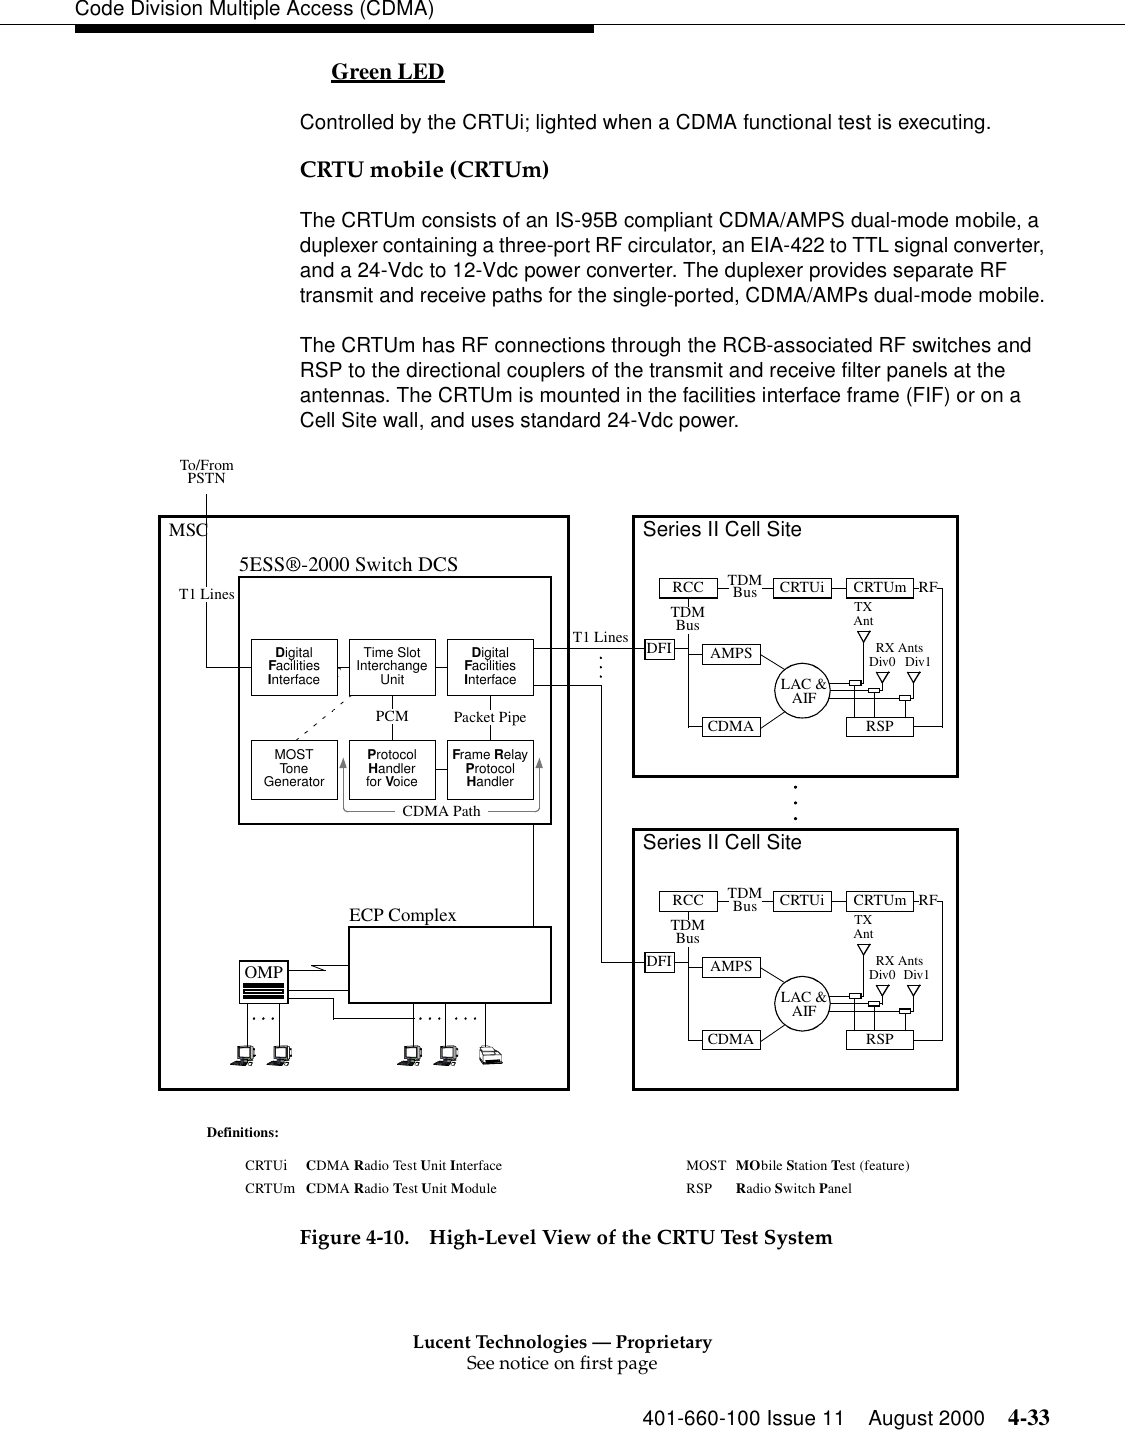 Lucent Technologies — ProprietarySee notice on first page401-660-100 Issue 11 August 2000 4-33Code Division Multiple Access (CDMA)Green LED 0Controlled by the CRTUi; lighted when a CDMA functional test is executing.CRTU mobile (CRTUm)The CRTUm consists of an IS-95B compliant CDMA/AMPS dual-mode mobile, a duplexer containing a three-port RF circulator, an EIA-422 to TTL signal converter, and a 24-Vdc to 12-Vdc power converter. The duplexer provides separate RF transmit and receive paths for the single-ported, CDMA/AMPs dual-mode mobile.The CRTUm has RF connections through the RCB-associated RF switches and RSP to the directional couplers of the transmit and receive filter panels at the antennas. The CRTUm is mounted in the facilities interface frame (FIF) or on a Cell Site wall, and uses standard 24-Vdc power.Figure 4-10. High-Level View of the CRTU Test SystemTXAntRCCCDMAAMPSLAC &amp;AIF RX AntsDiv0   Div1RSPCRTUmCRTUiTXAntRCCCDMAAMPSLAC &amp;AIF RX AntsDiv0  Div1RSPCRTUmCRTUi5ESS®-2000 Switch DCSTo/FromECP ComplexOMPTime SlotInterchangeUnitPCM Packet PipeDIGITAL TRUNK UNITT1 LinesPSTNMSCFrame RelayProtocolHandlerMOSTToneGeneratorDigitalFacilitiesInterfaceDigitalFacilitiesInterfaceProtocolHandlerfor VoiceCRTUmCRTUiDefinitions:   CDMA Radio Test Unit Module   CDMA Radio Test Unit Interface MOSTRSPMObile Station Test (feature)Radio Switch PanelSeries II Cell SiteSeries II Cell SiteDFIDFIT1 LinesCDMA PathTDMBusTDMBus RFTDMBusTDMBus RF